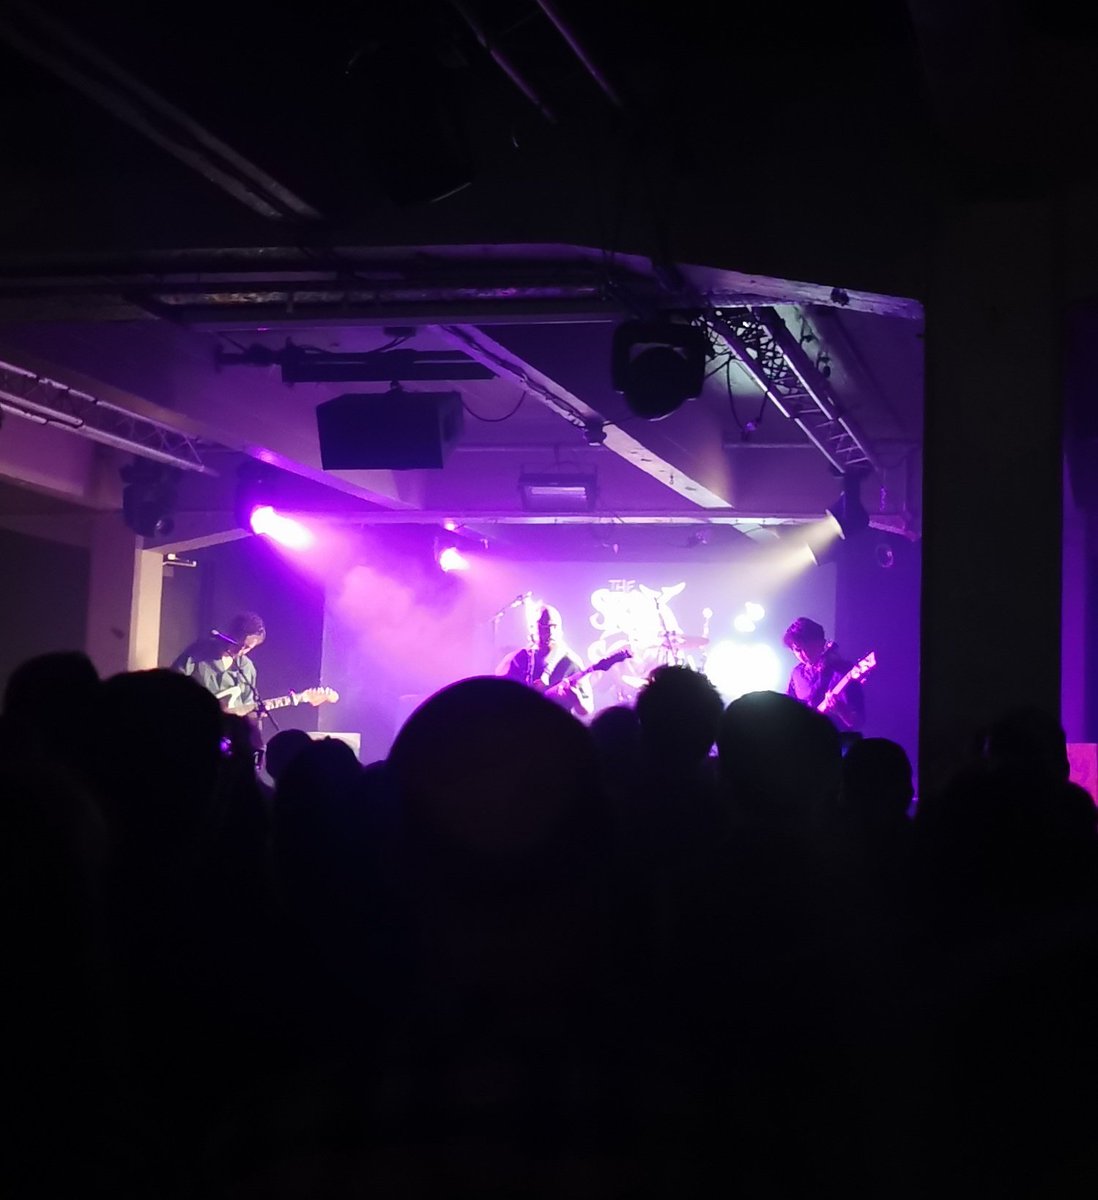 Got myself regulated (thank you bath) in time to make it to @spookschool in Glasgow. They played my favourite song, I cried, they played other songs, I got to scream 'fuck you I'm still alive' in a room full of fellow fans, and all was well